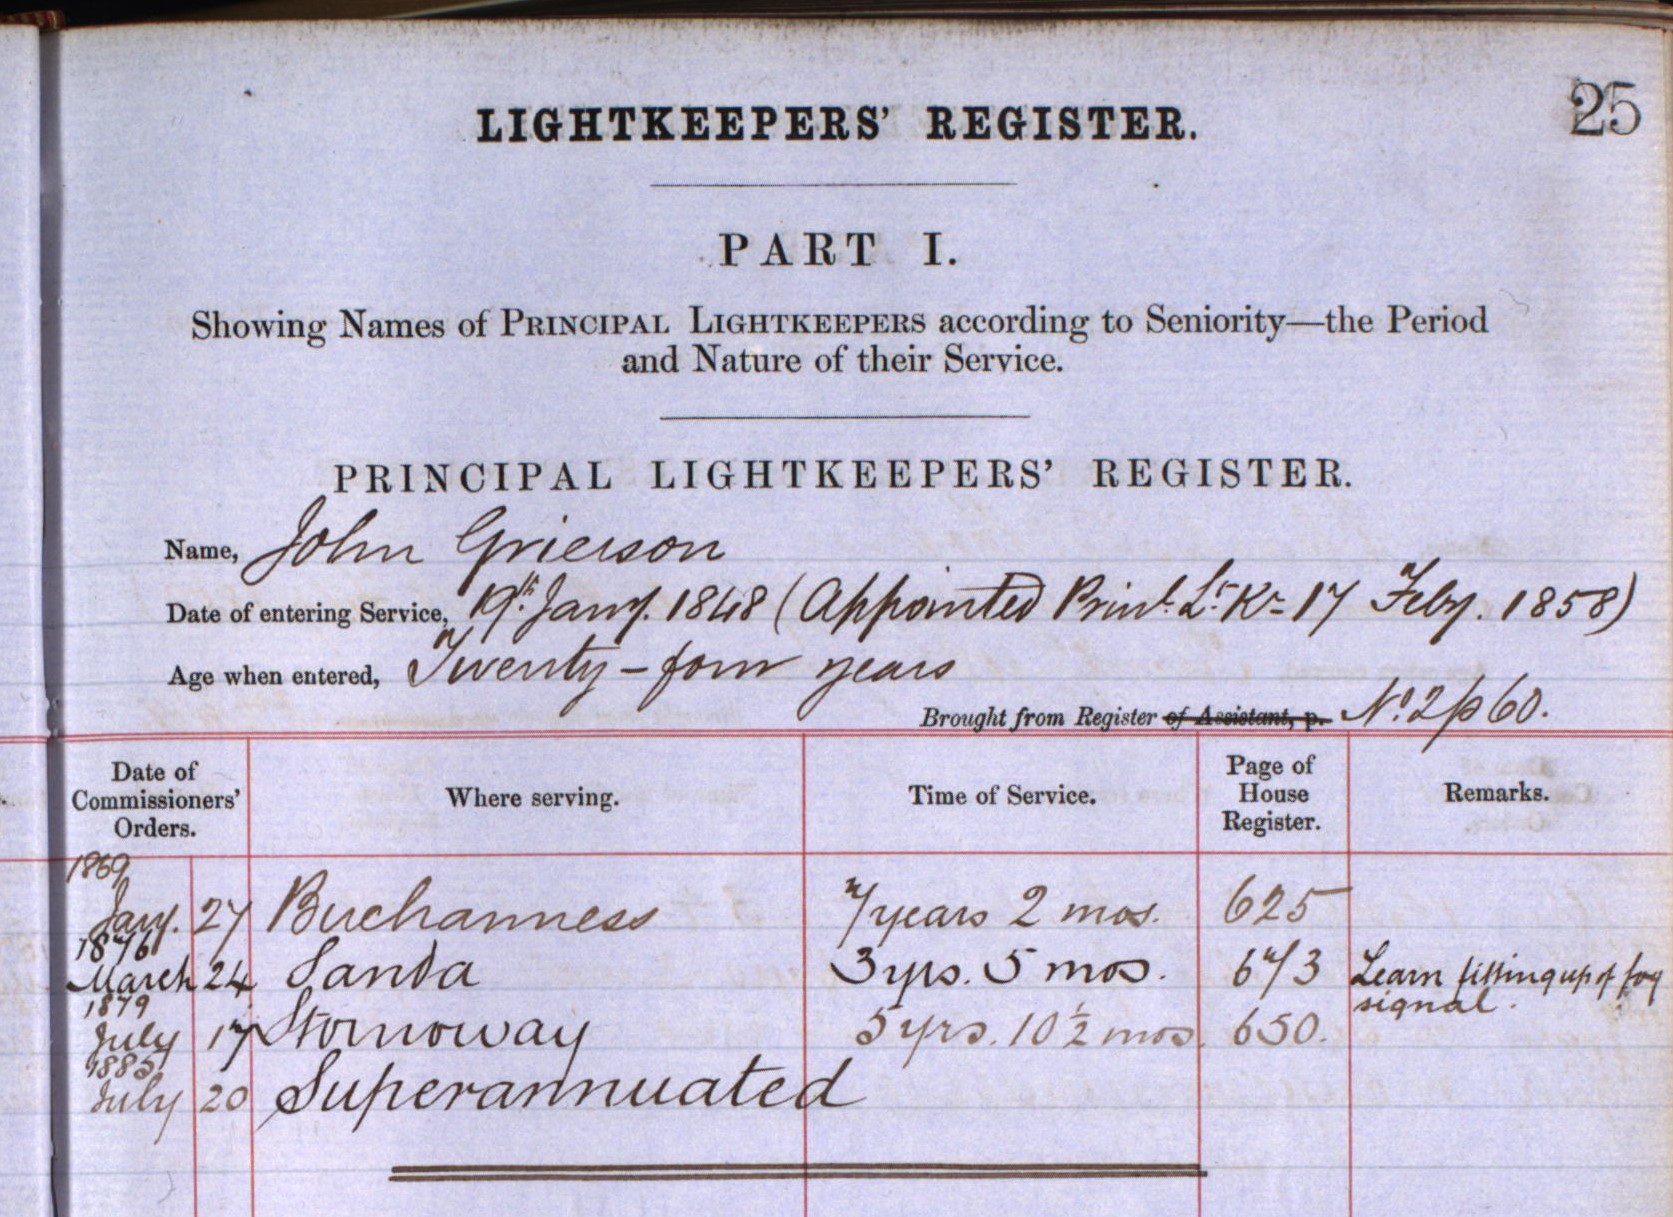 John Grierson's record of work for the Commissioners of Northern Lighthouse